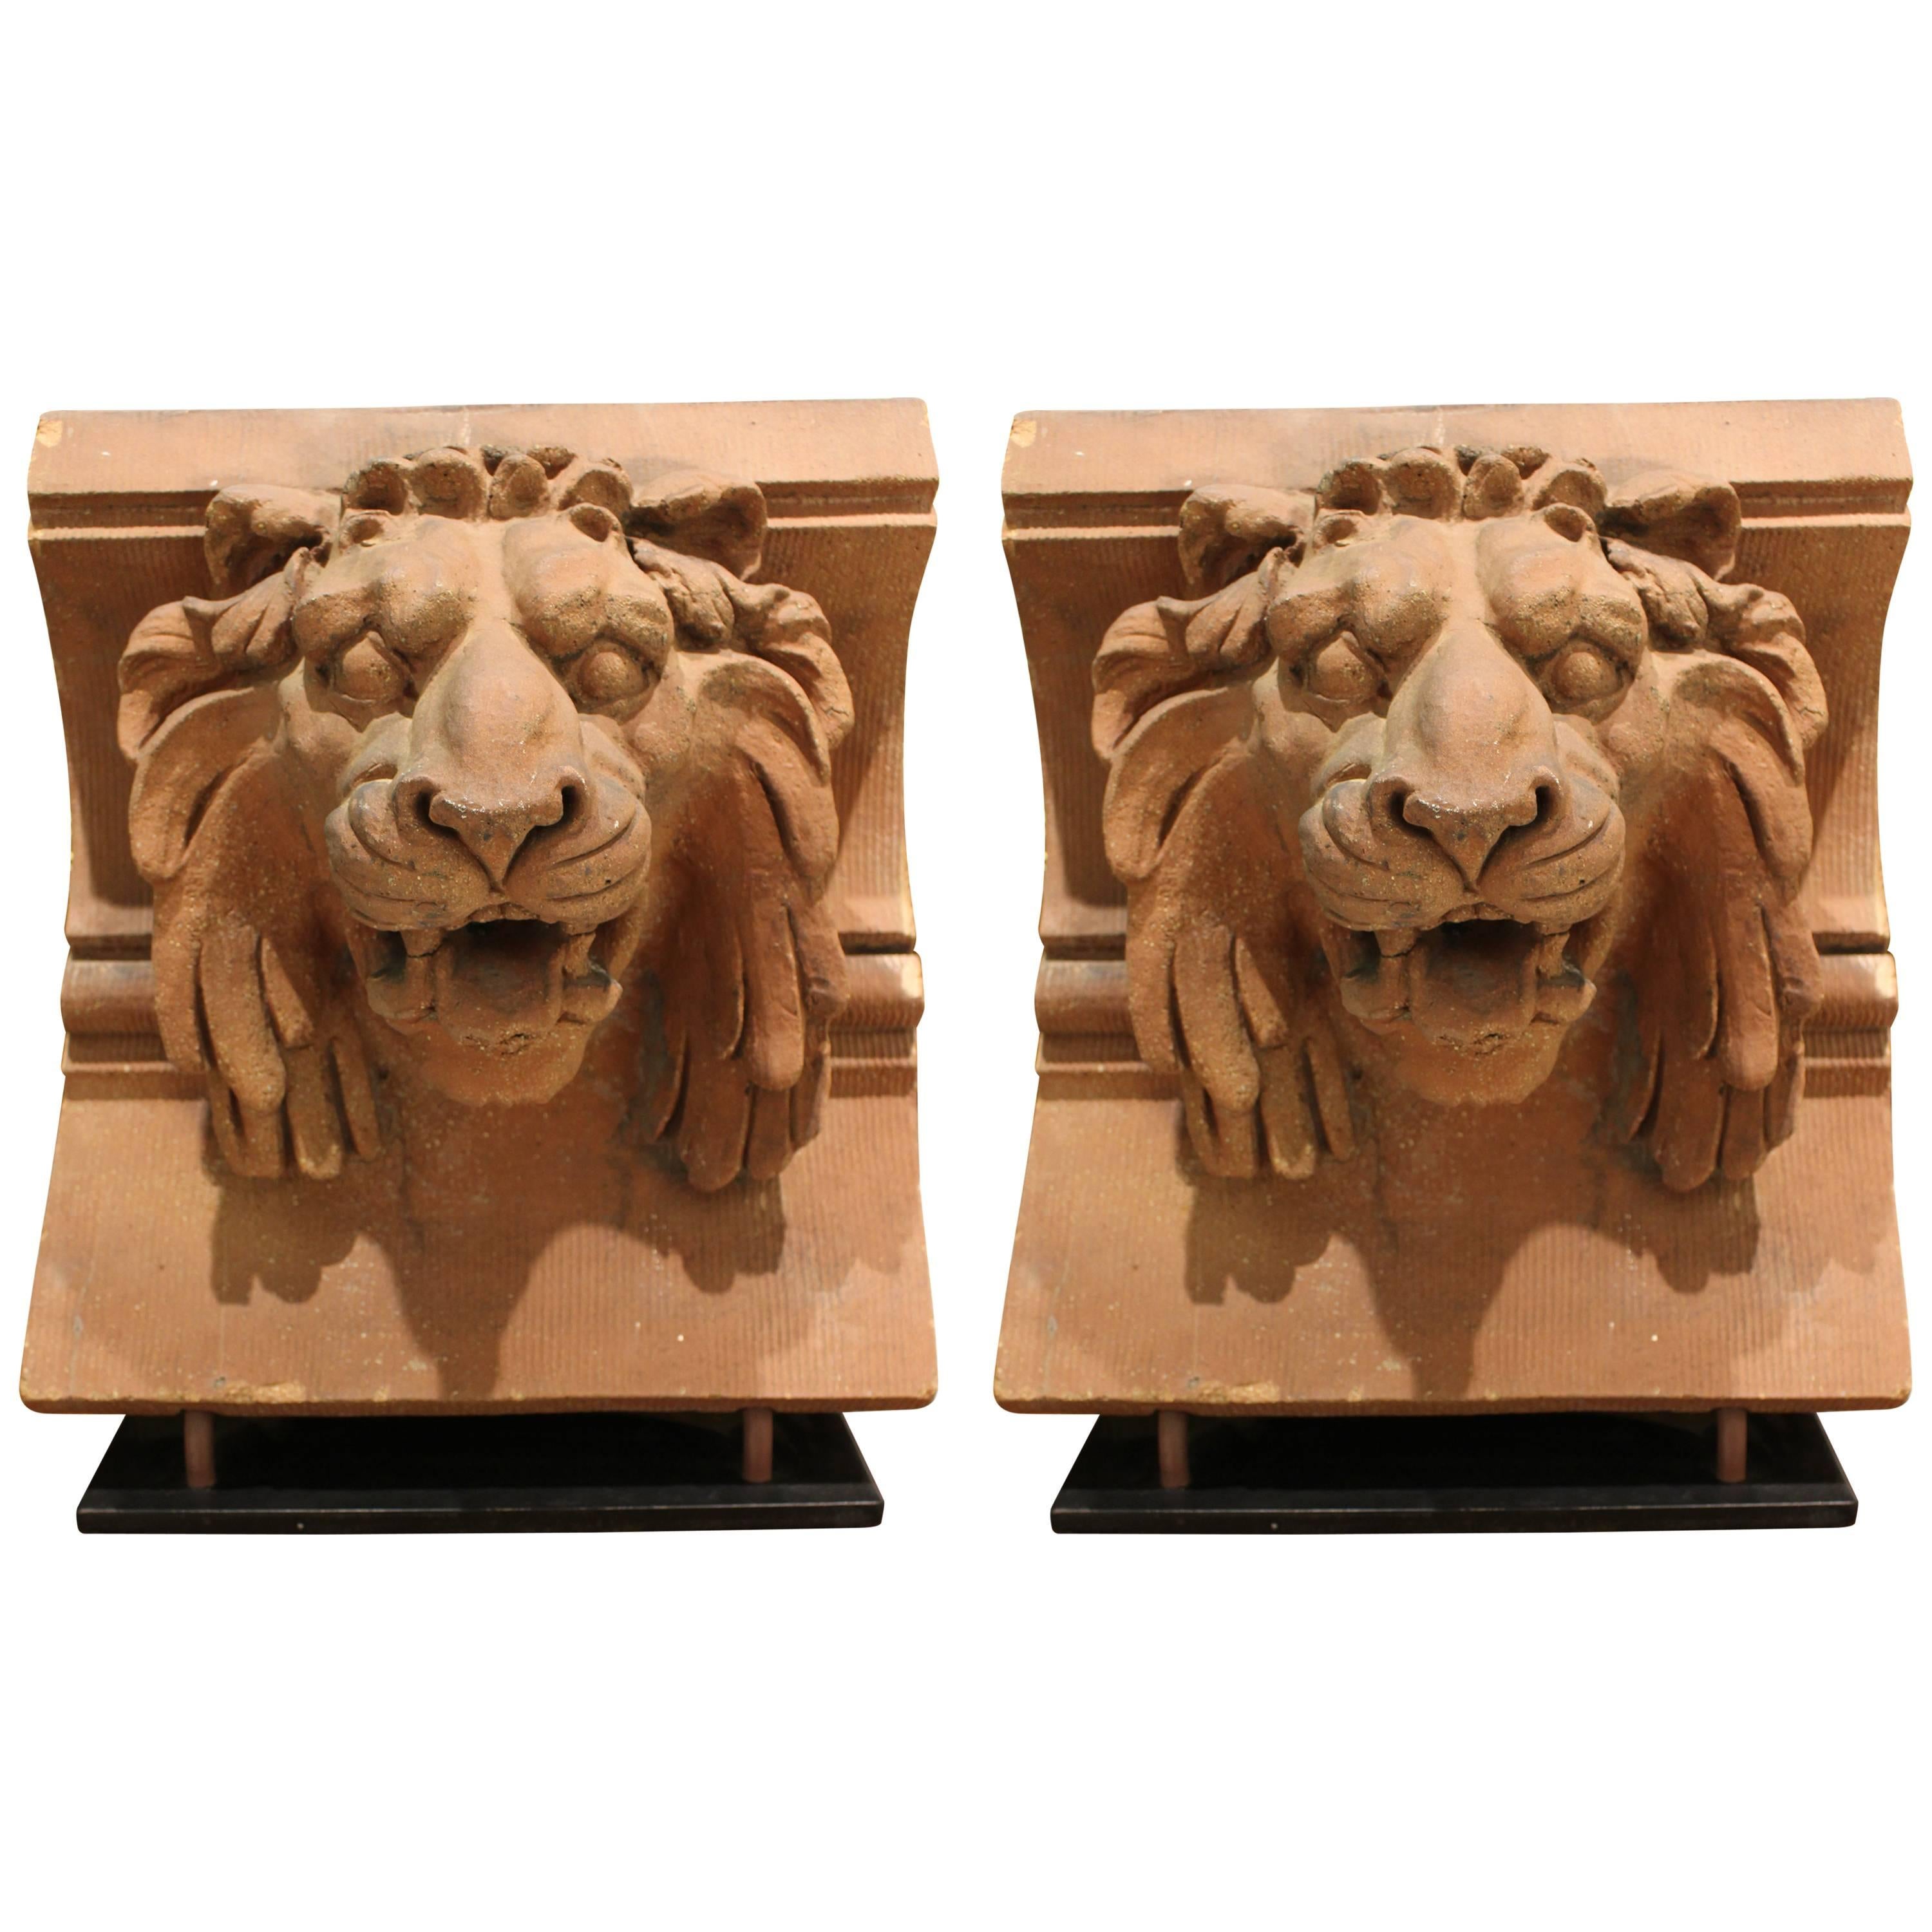 Pair of American 19th Century Terracotta Lion Architectural Elements, New York